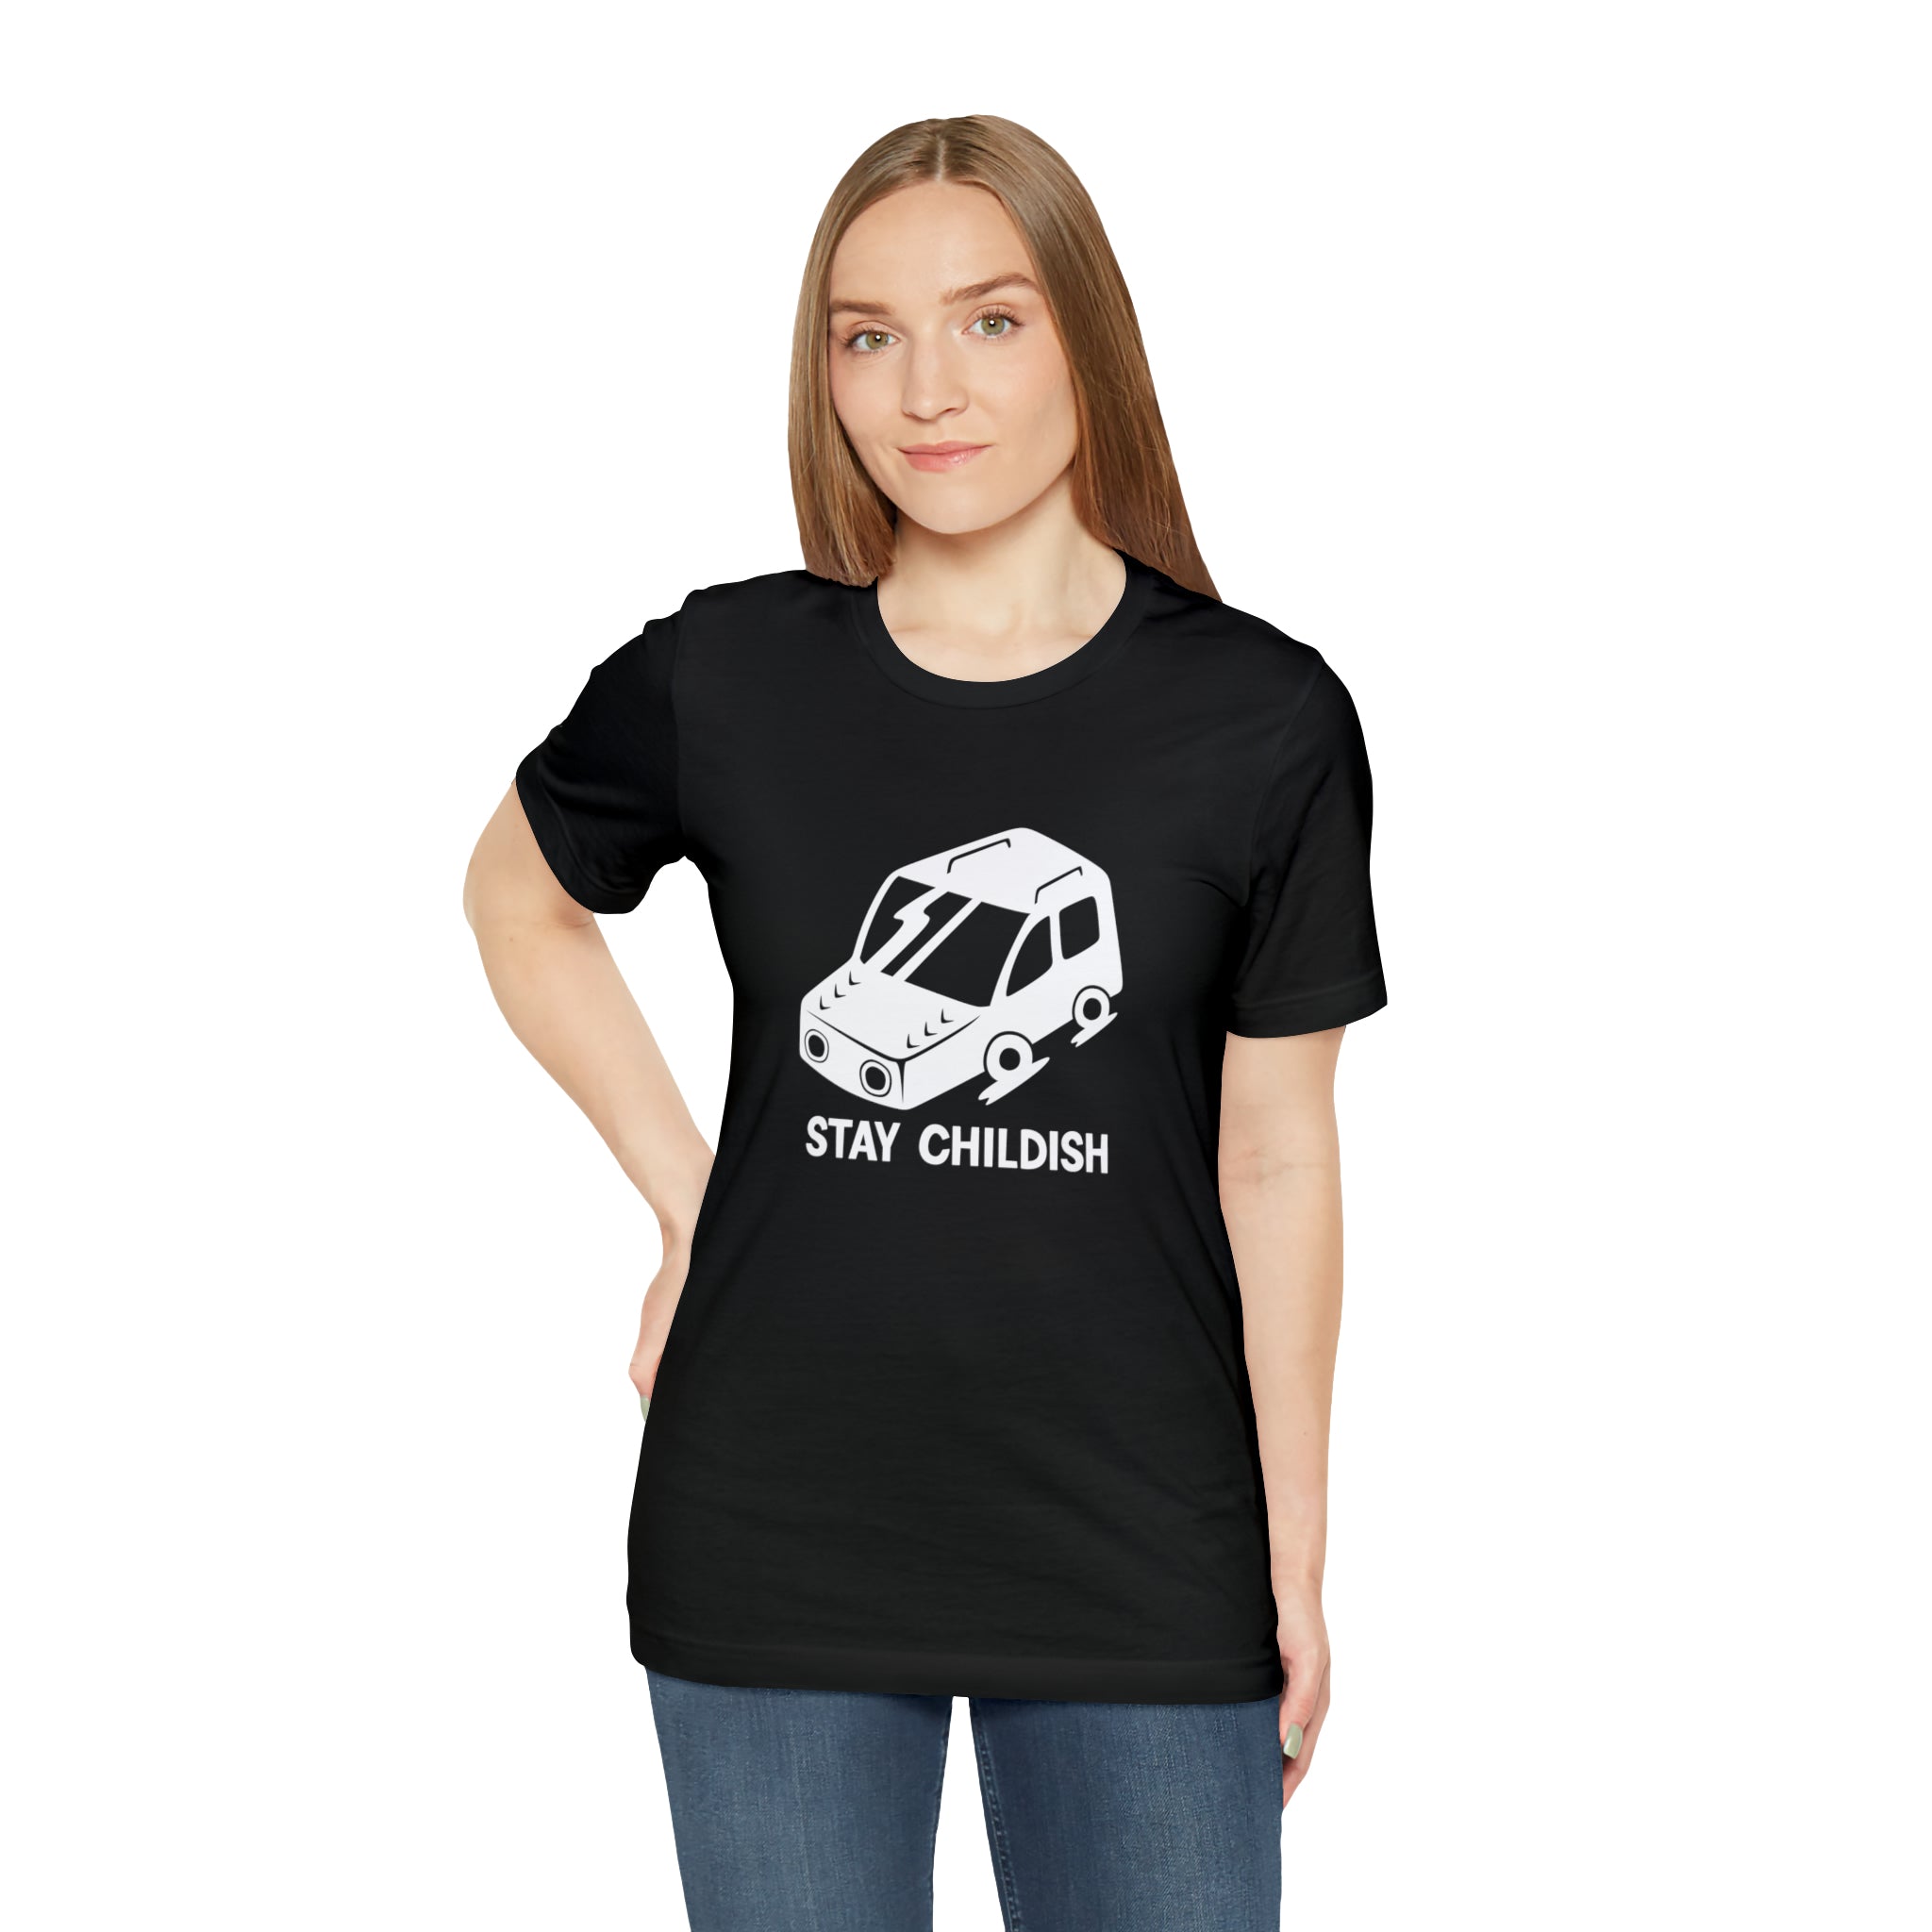 A woman wearing a black Stay Childish T-shirt depicting a white car, staying young at heart.